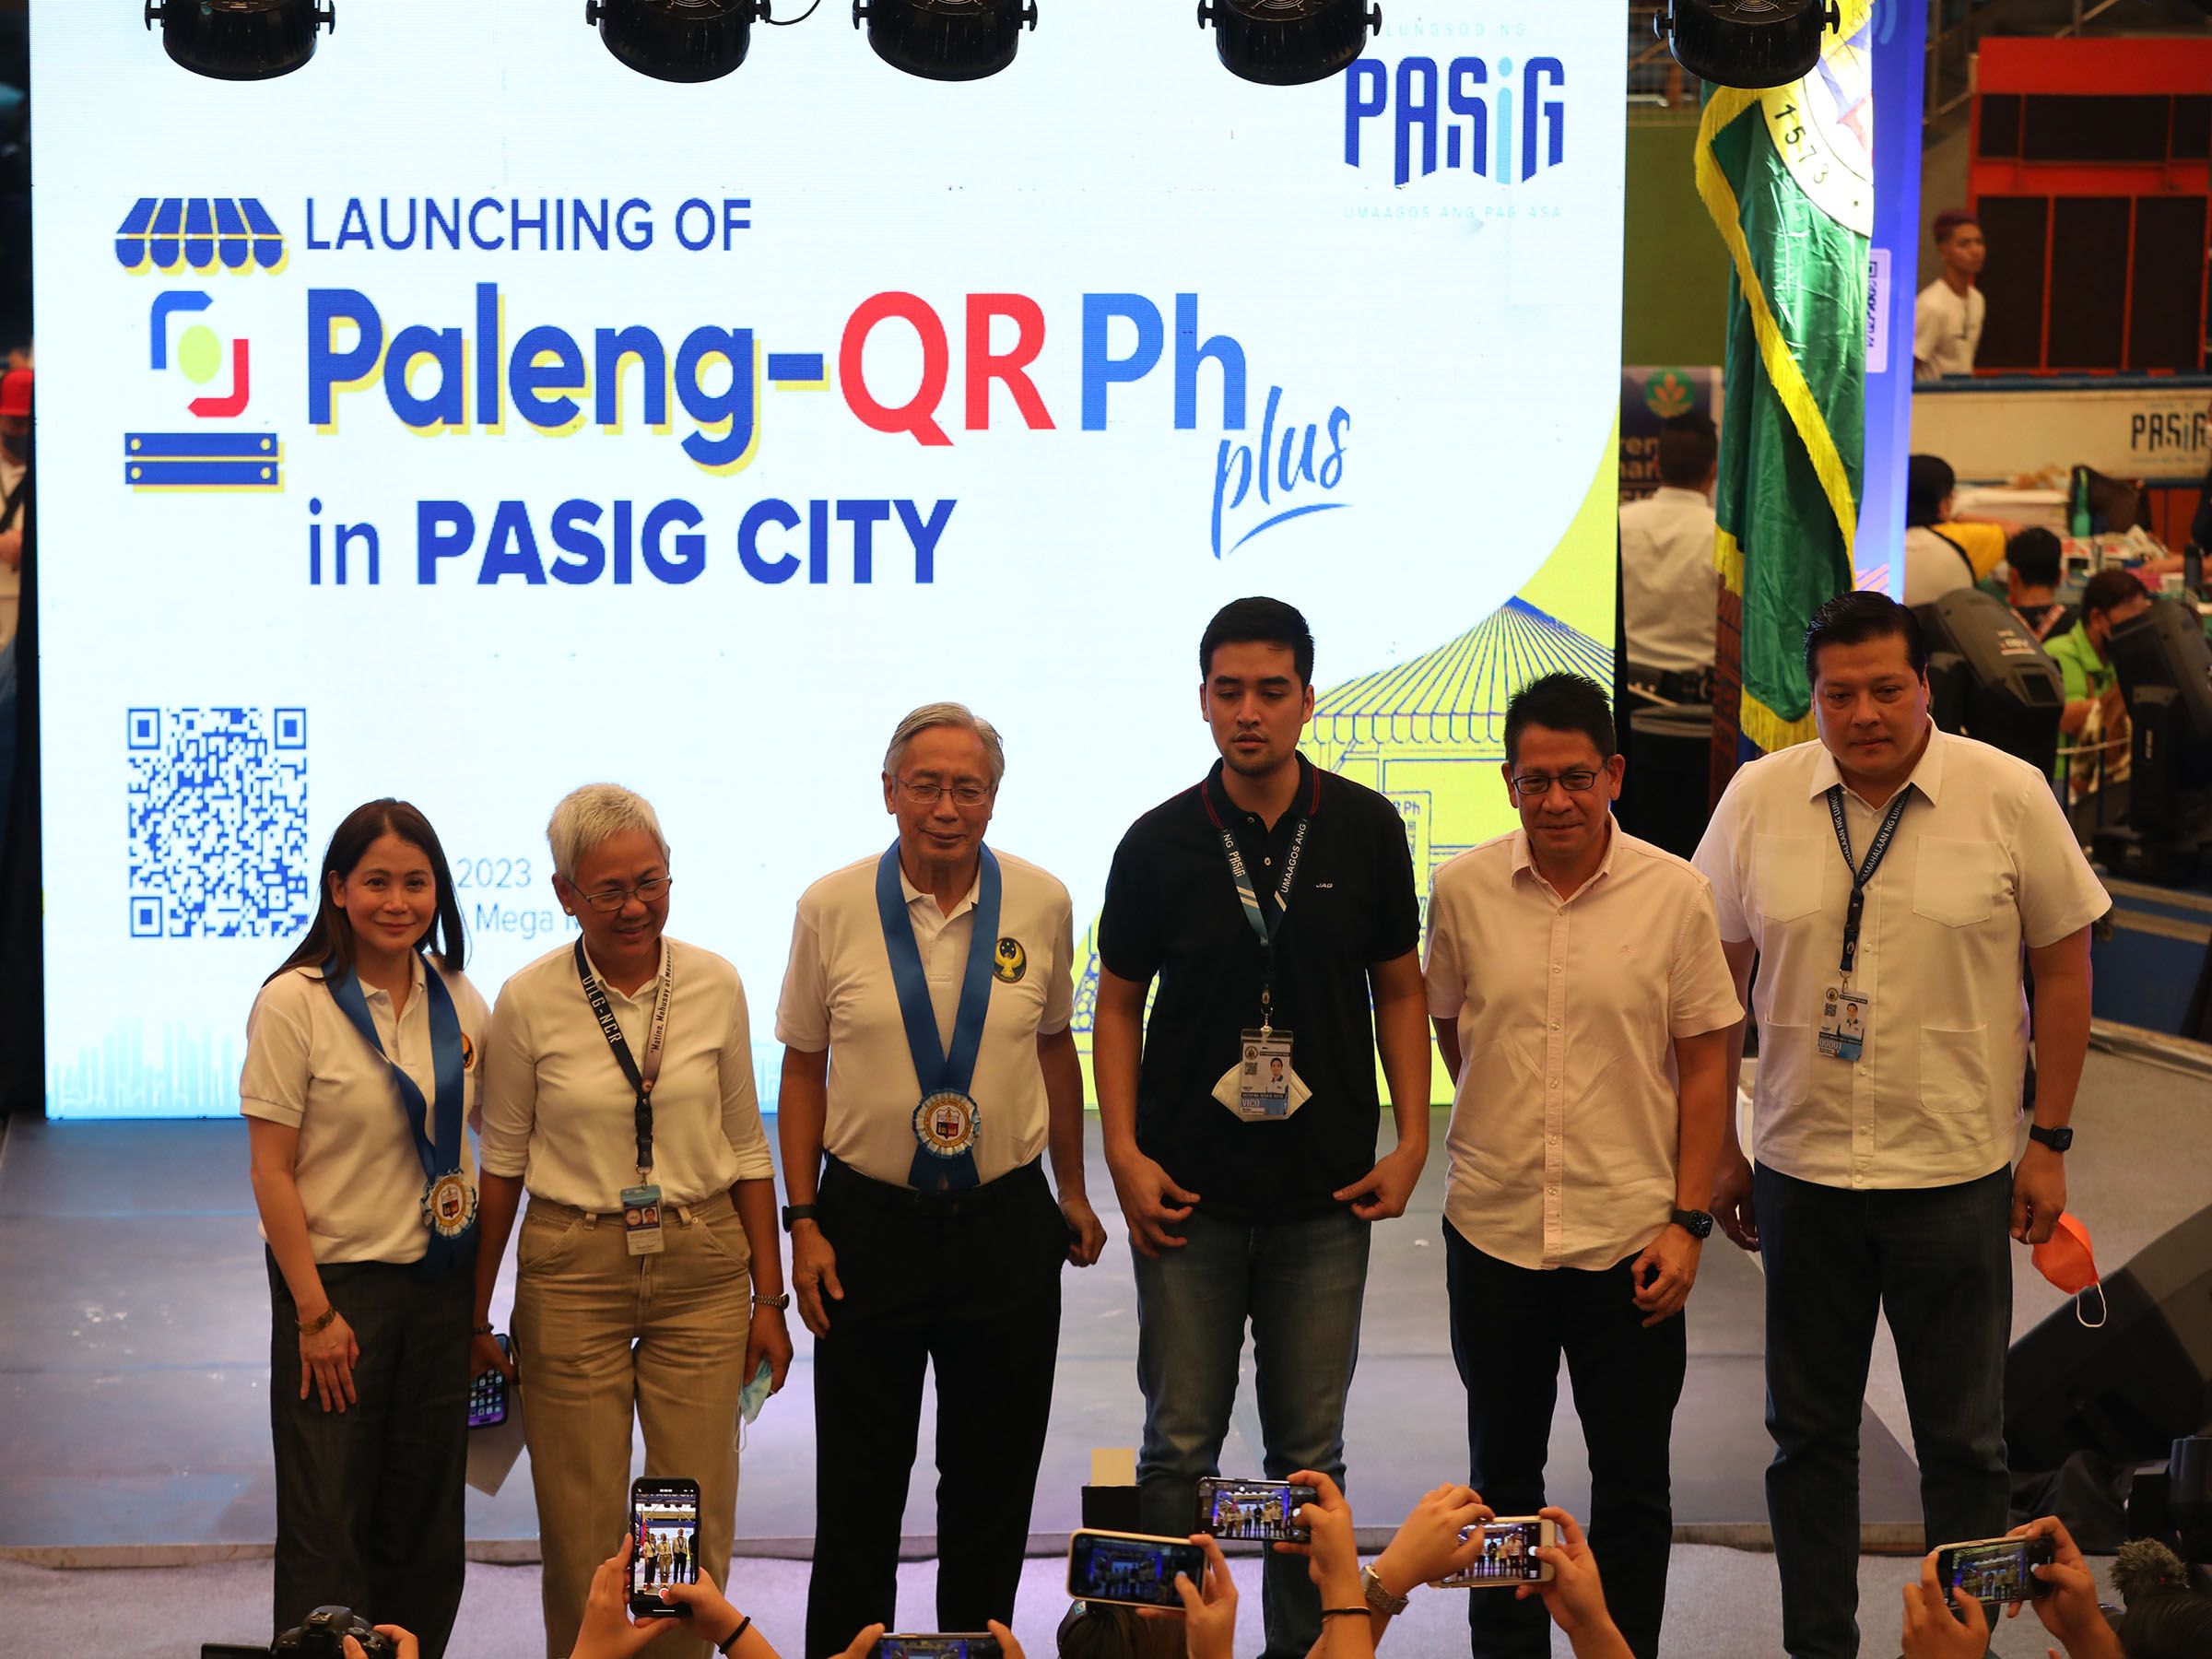 Paleng QR PH Plus program in Pasig City--  The Bangko Sentral ng Pilipinas and the City of Pasig launched the Paleng QR PH program to market vendors in Pasig so they can digitize their transactions. From left are BSP Deputy Director Bernadette Romulo Puyat; Pasig City Director Visitacion Martinez, BSP Governor Dr. Felipe Medalla; Pasig City Mayor Vico Sotto, Pasig Rep. Roman Romulo and Pasig Vice Mayor Robert Vincent Jude "Dodot" Bautista Jaworski Jr. P held at thePasig Public Market today. The BSP will continue to support the local government units in the implementation of the Paleng-QR PH Plus program to boost the growth of the digital ecosystem and transaction account ownership in the country. DANNY QUERUBIN 